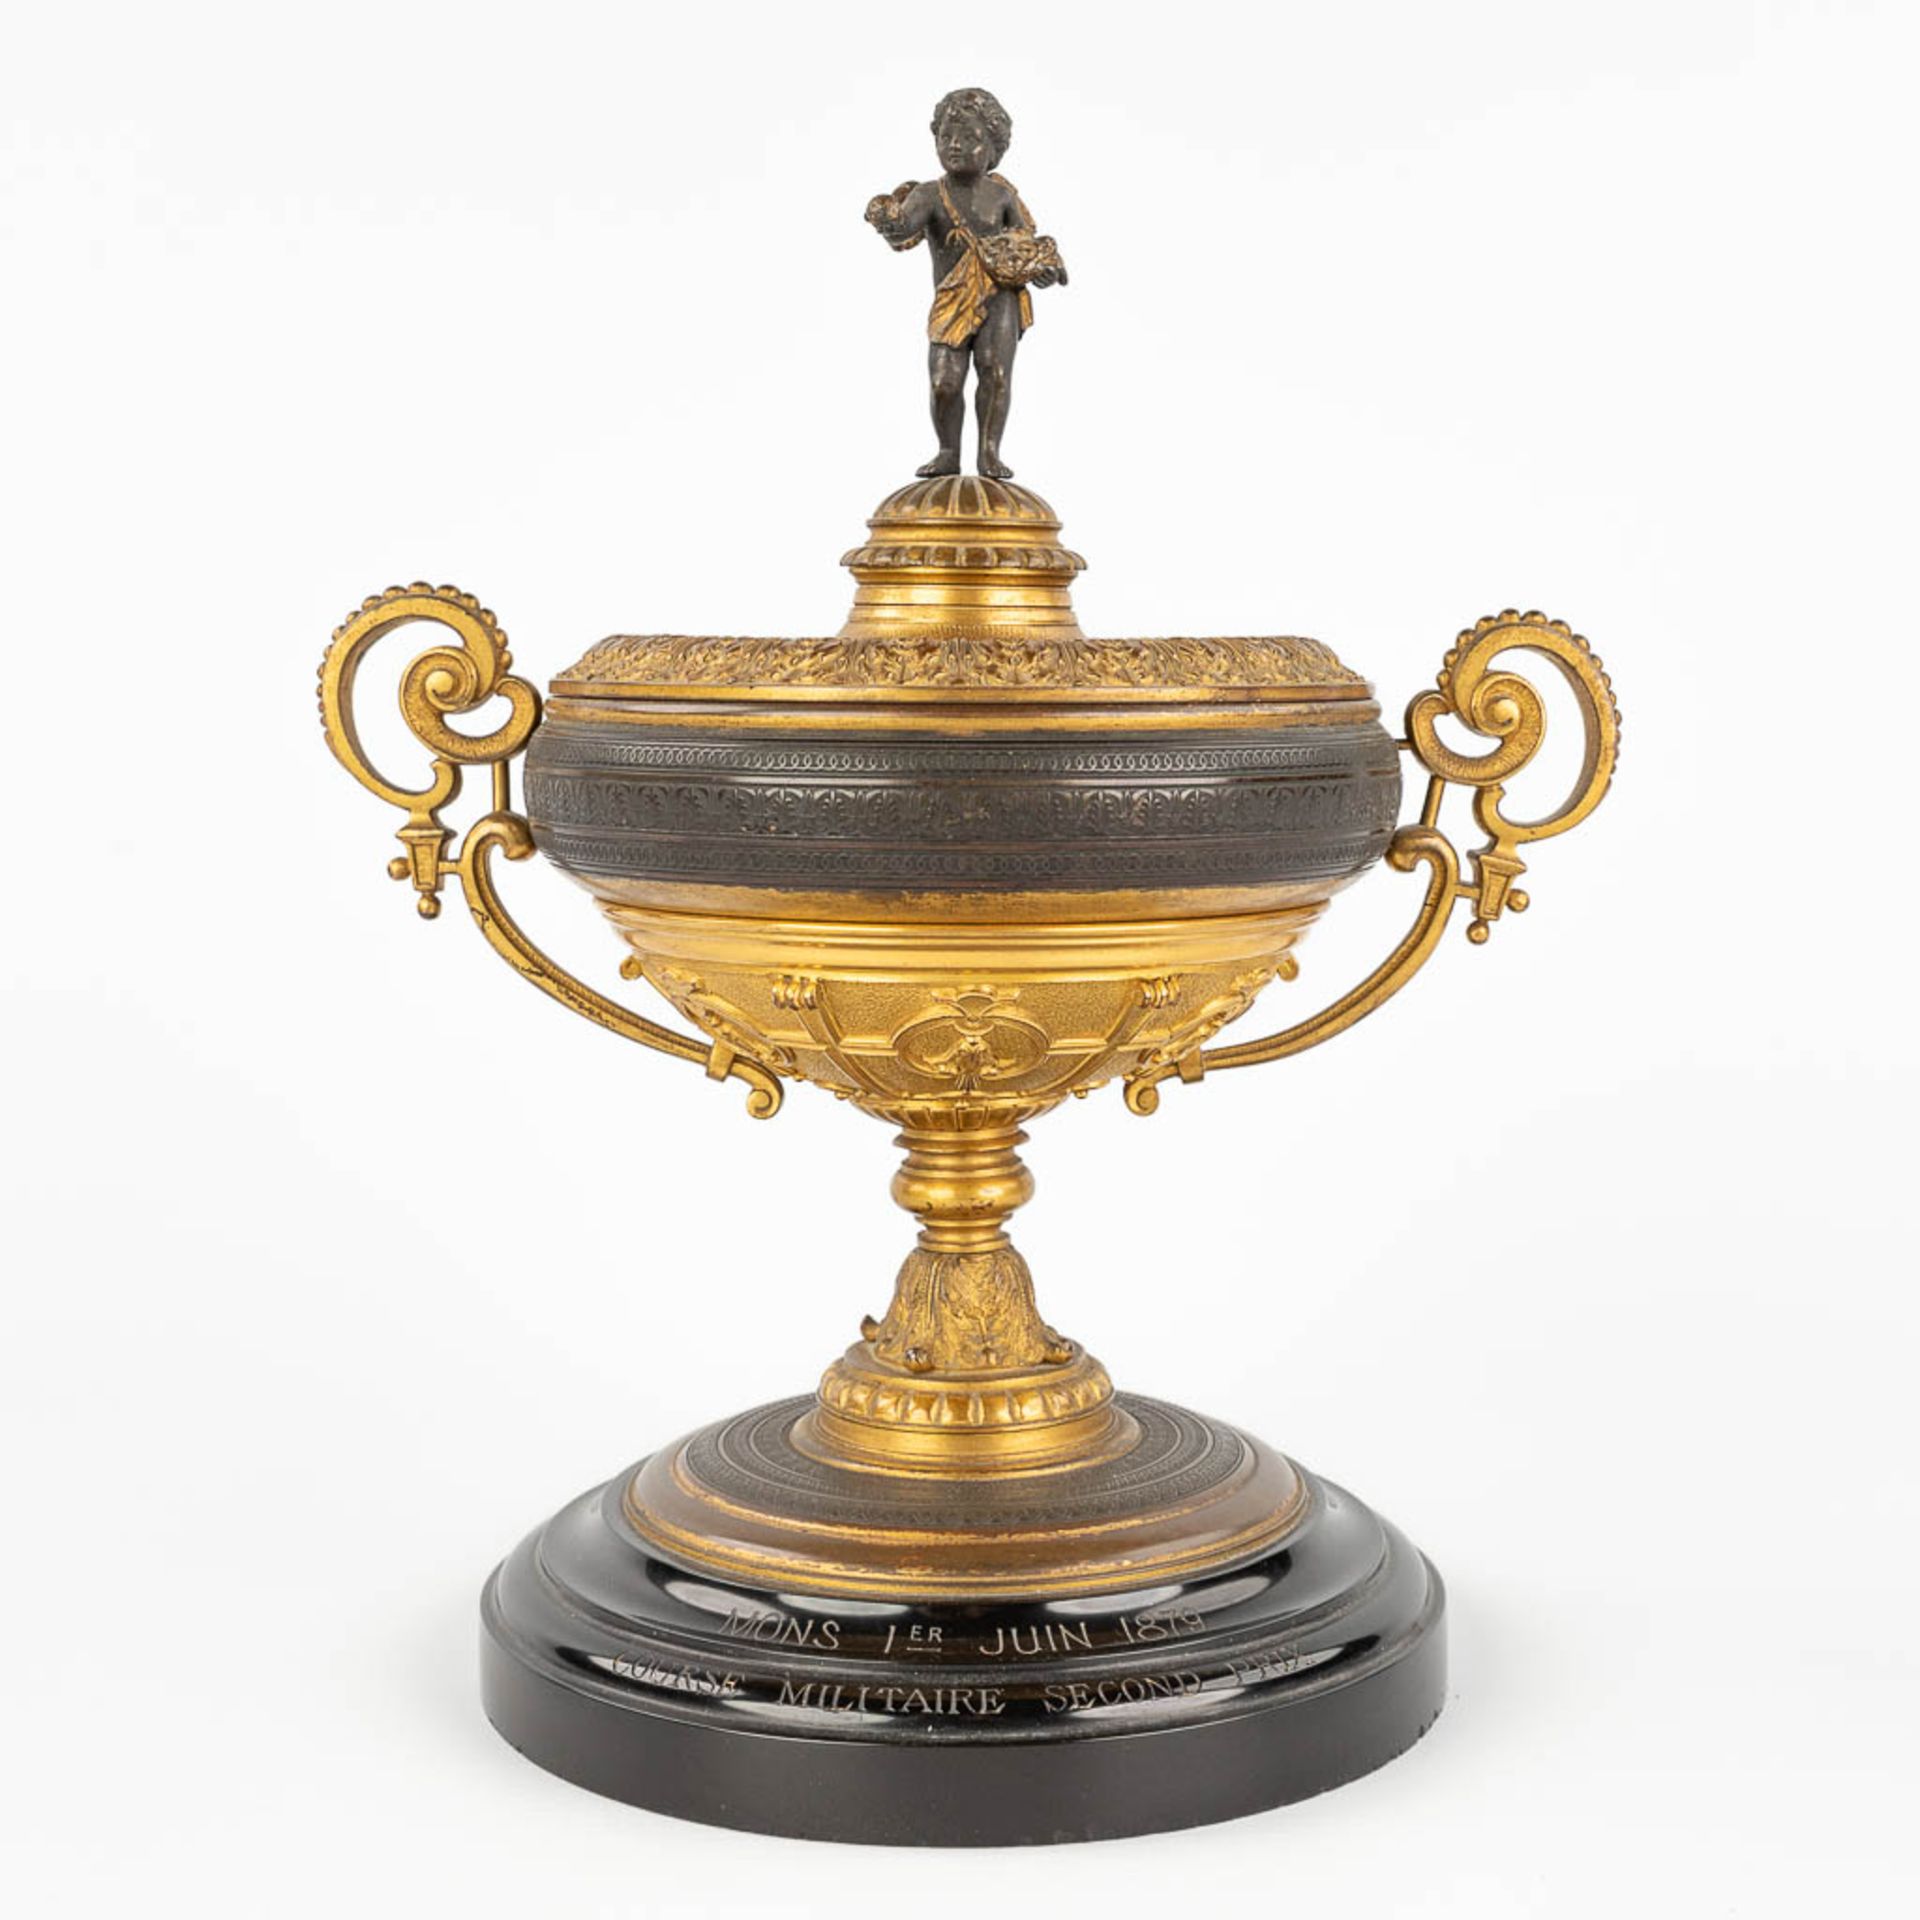 An antique trophy, made of gilt and patinated bronze. 19th C. (L: 16 x W: 22 x H: 27 cm)